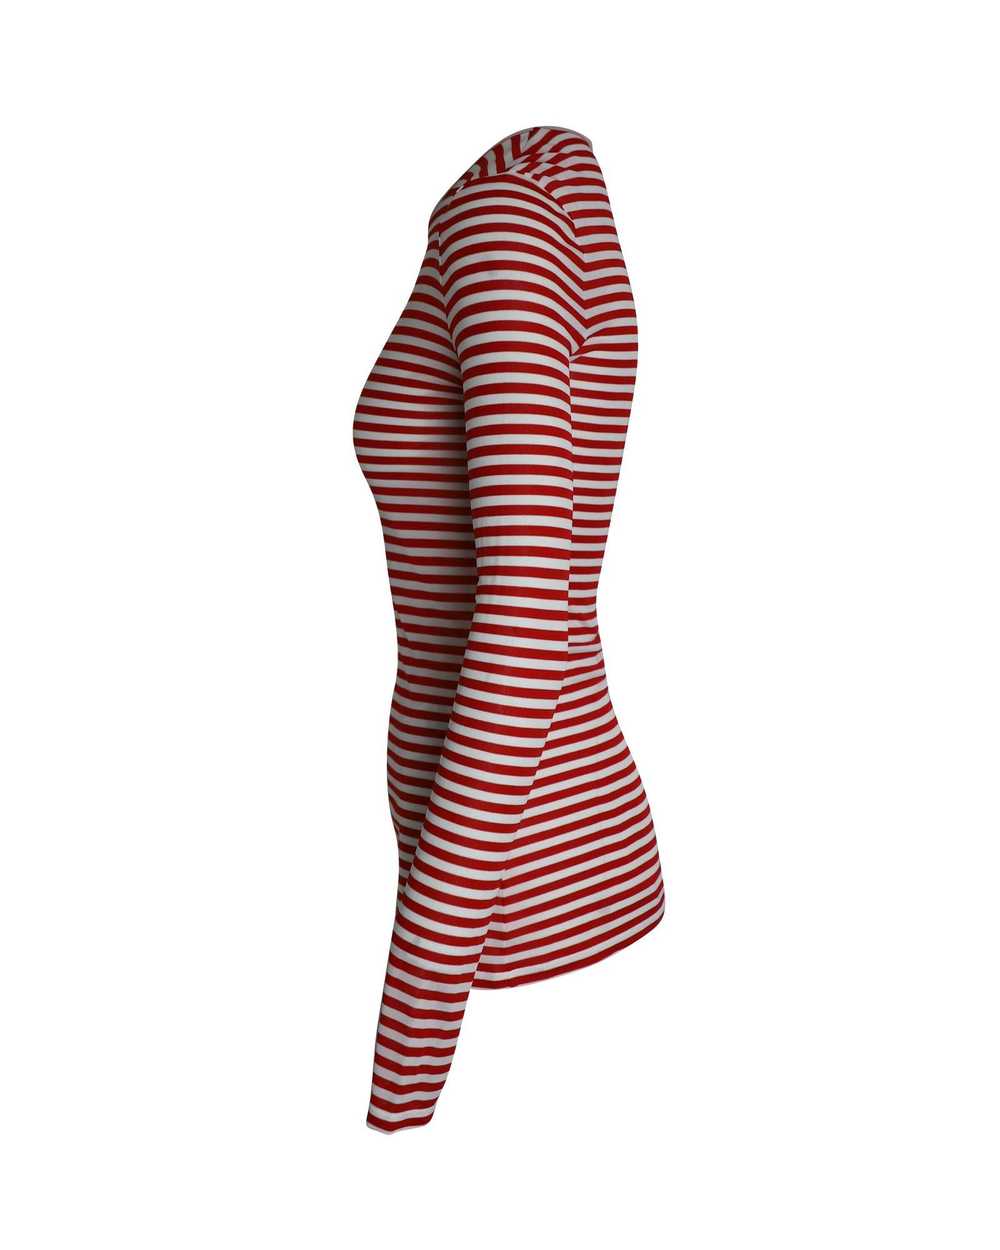 Max Mara Striped Long Sleeve Top in Red and White… - image 2